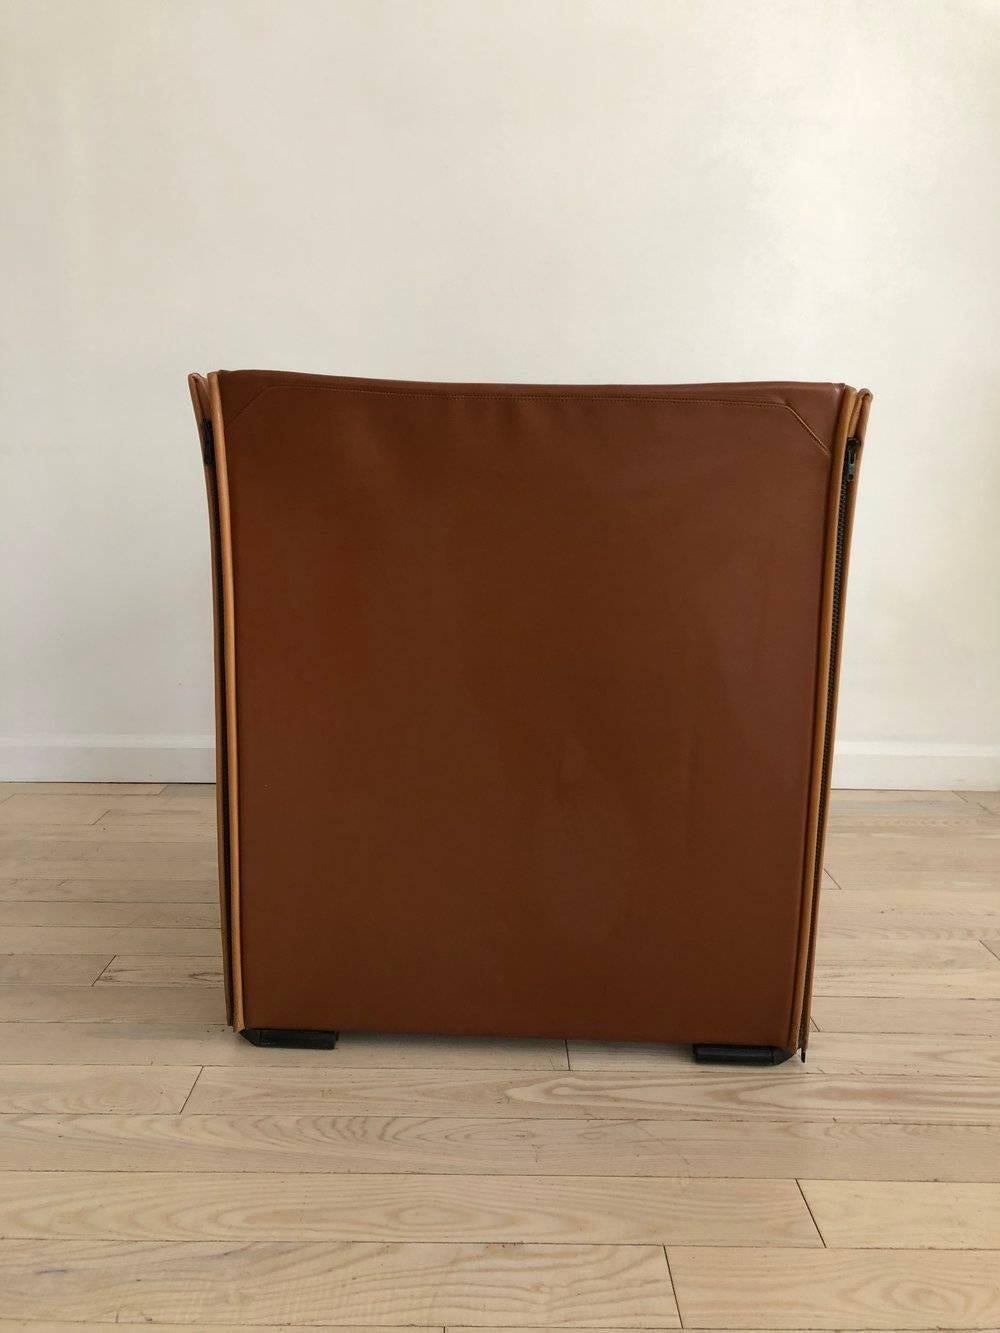 Post-Modern 1976 401 Break Chair by Mario Bellini for Cassina, Brown Leather